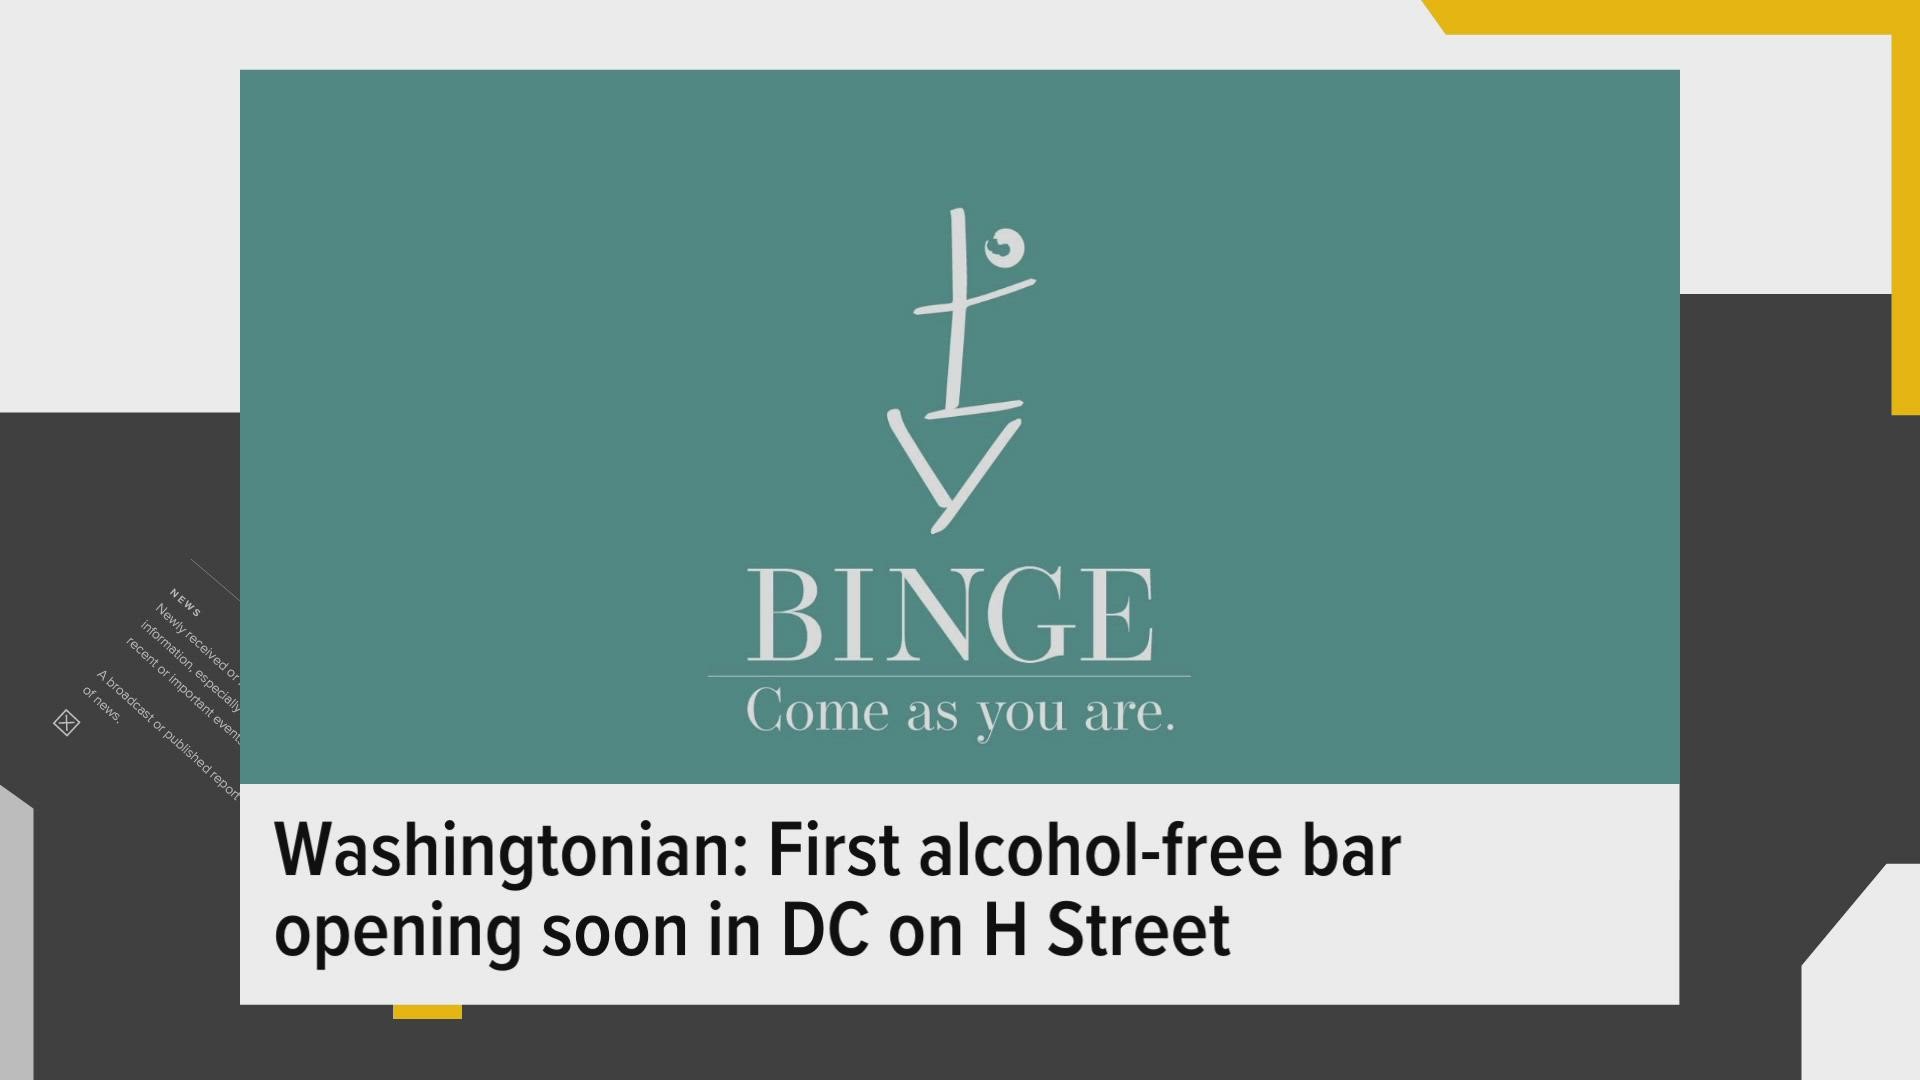 The Binge Bar is set to open on H Street in D.C. Drinks will cost $6-$15 on average.